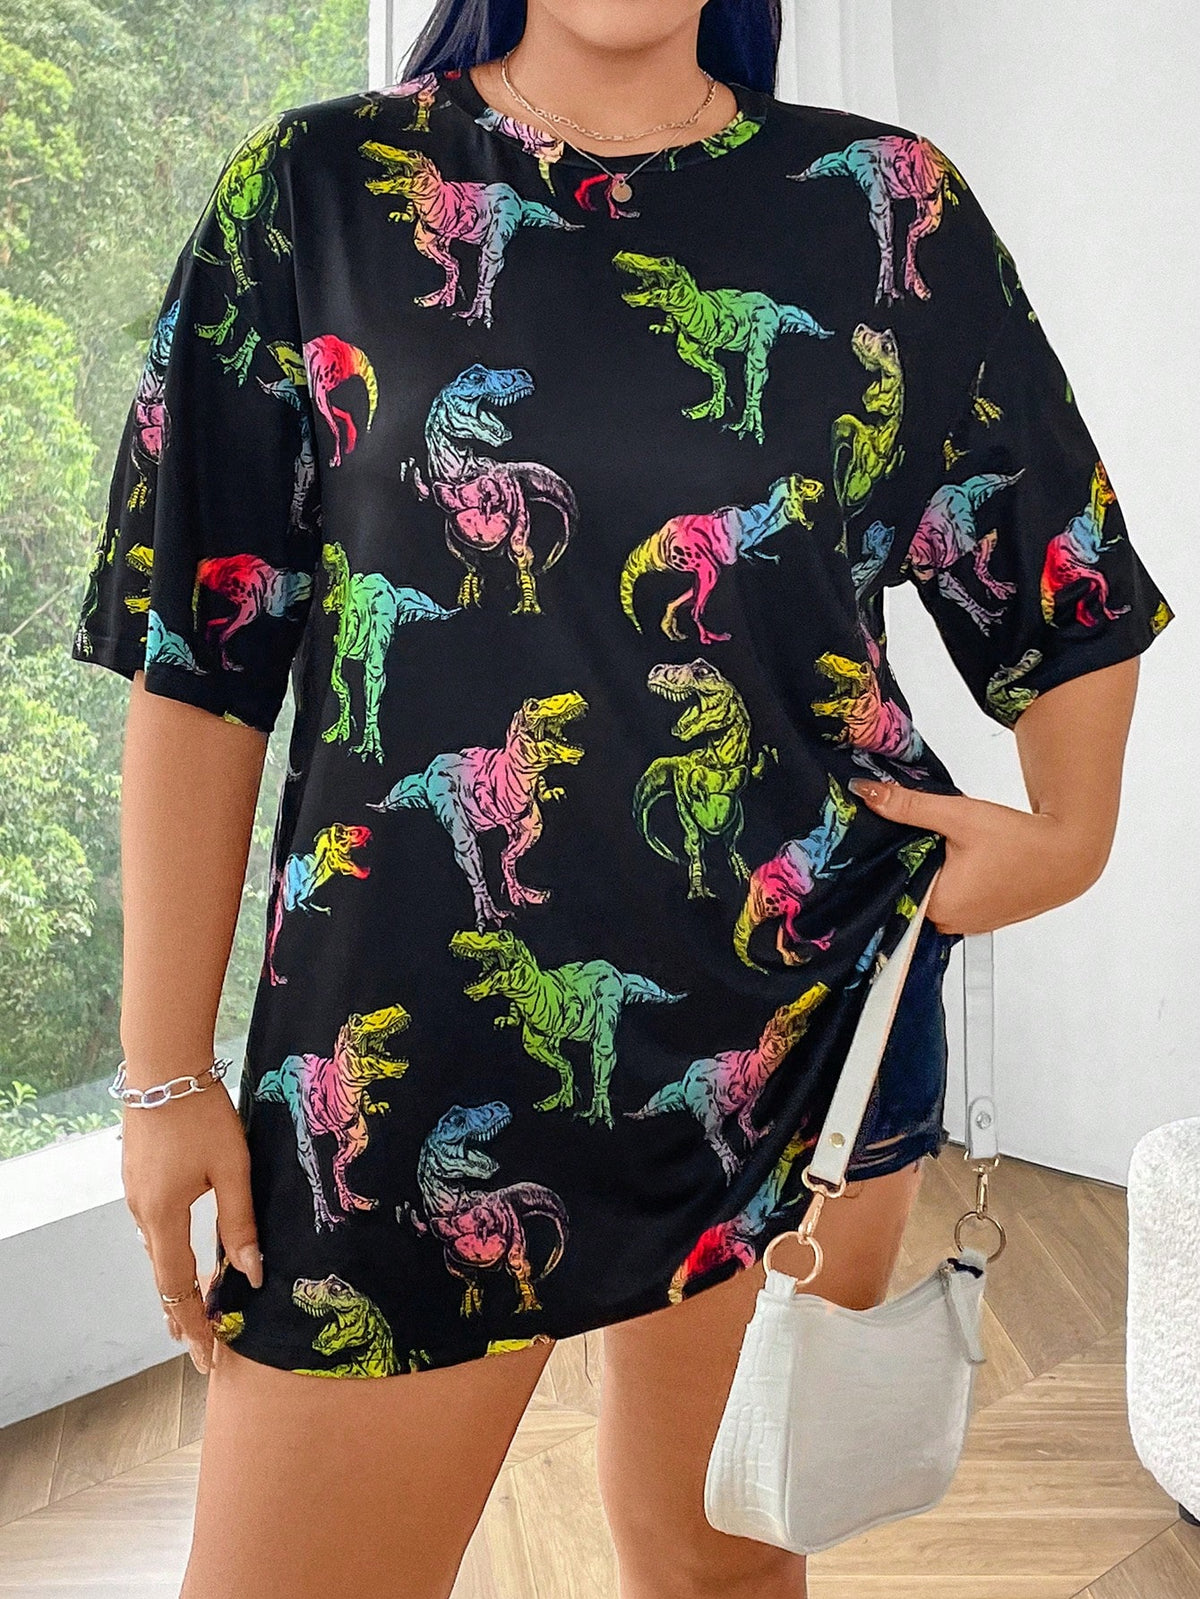 EZwear Plus Size Women Casual Dinosaur Printed Round Neck Oversized Short Sleeve T-Shirt For Summer